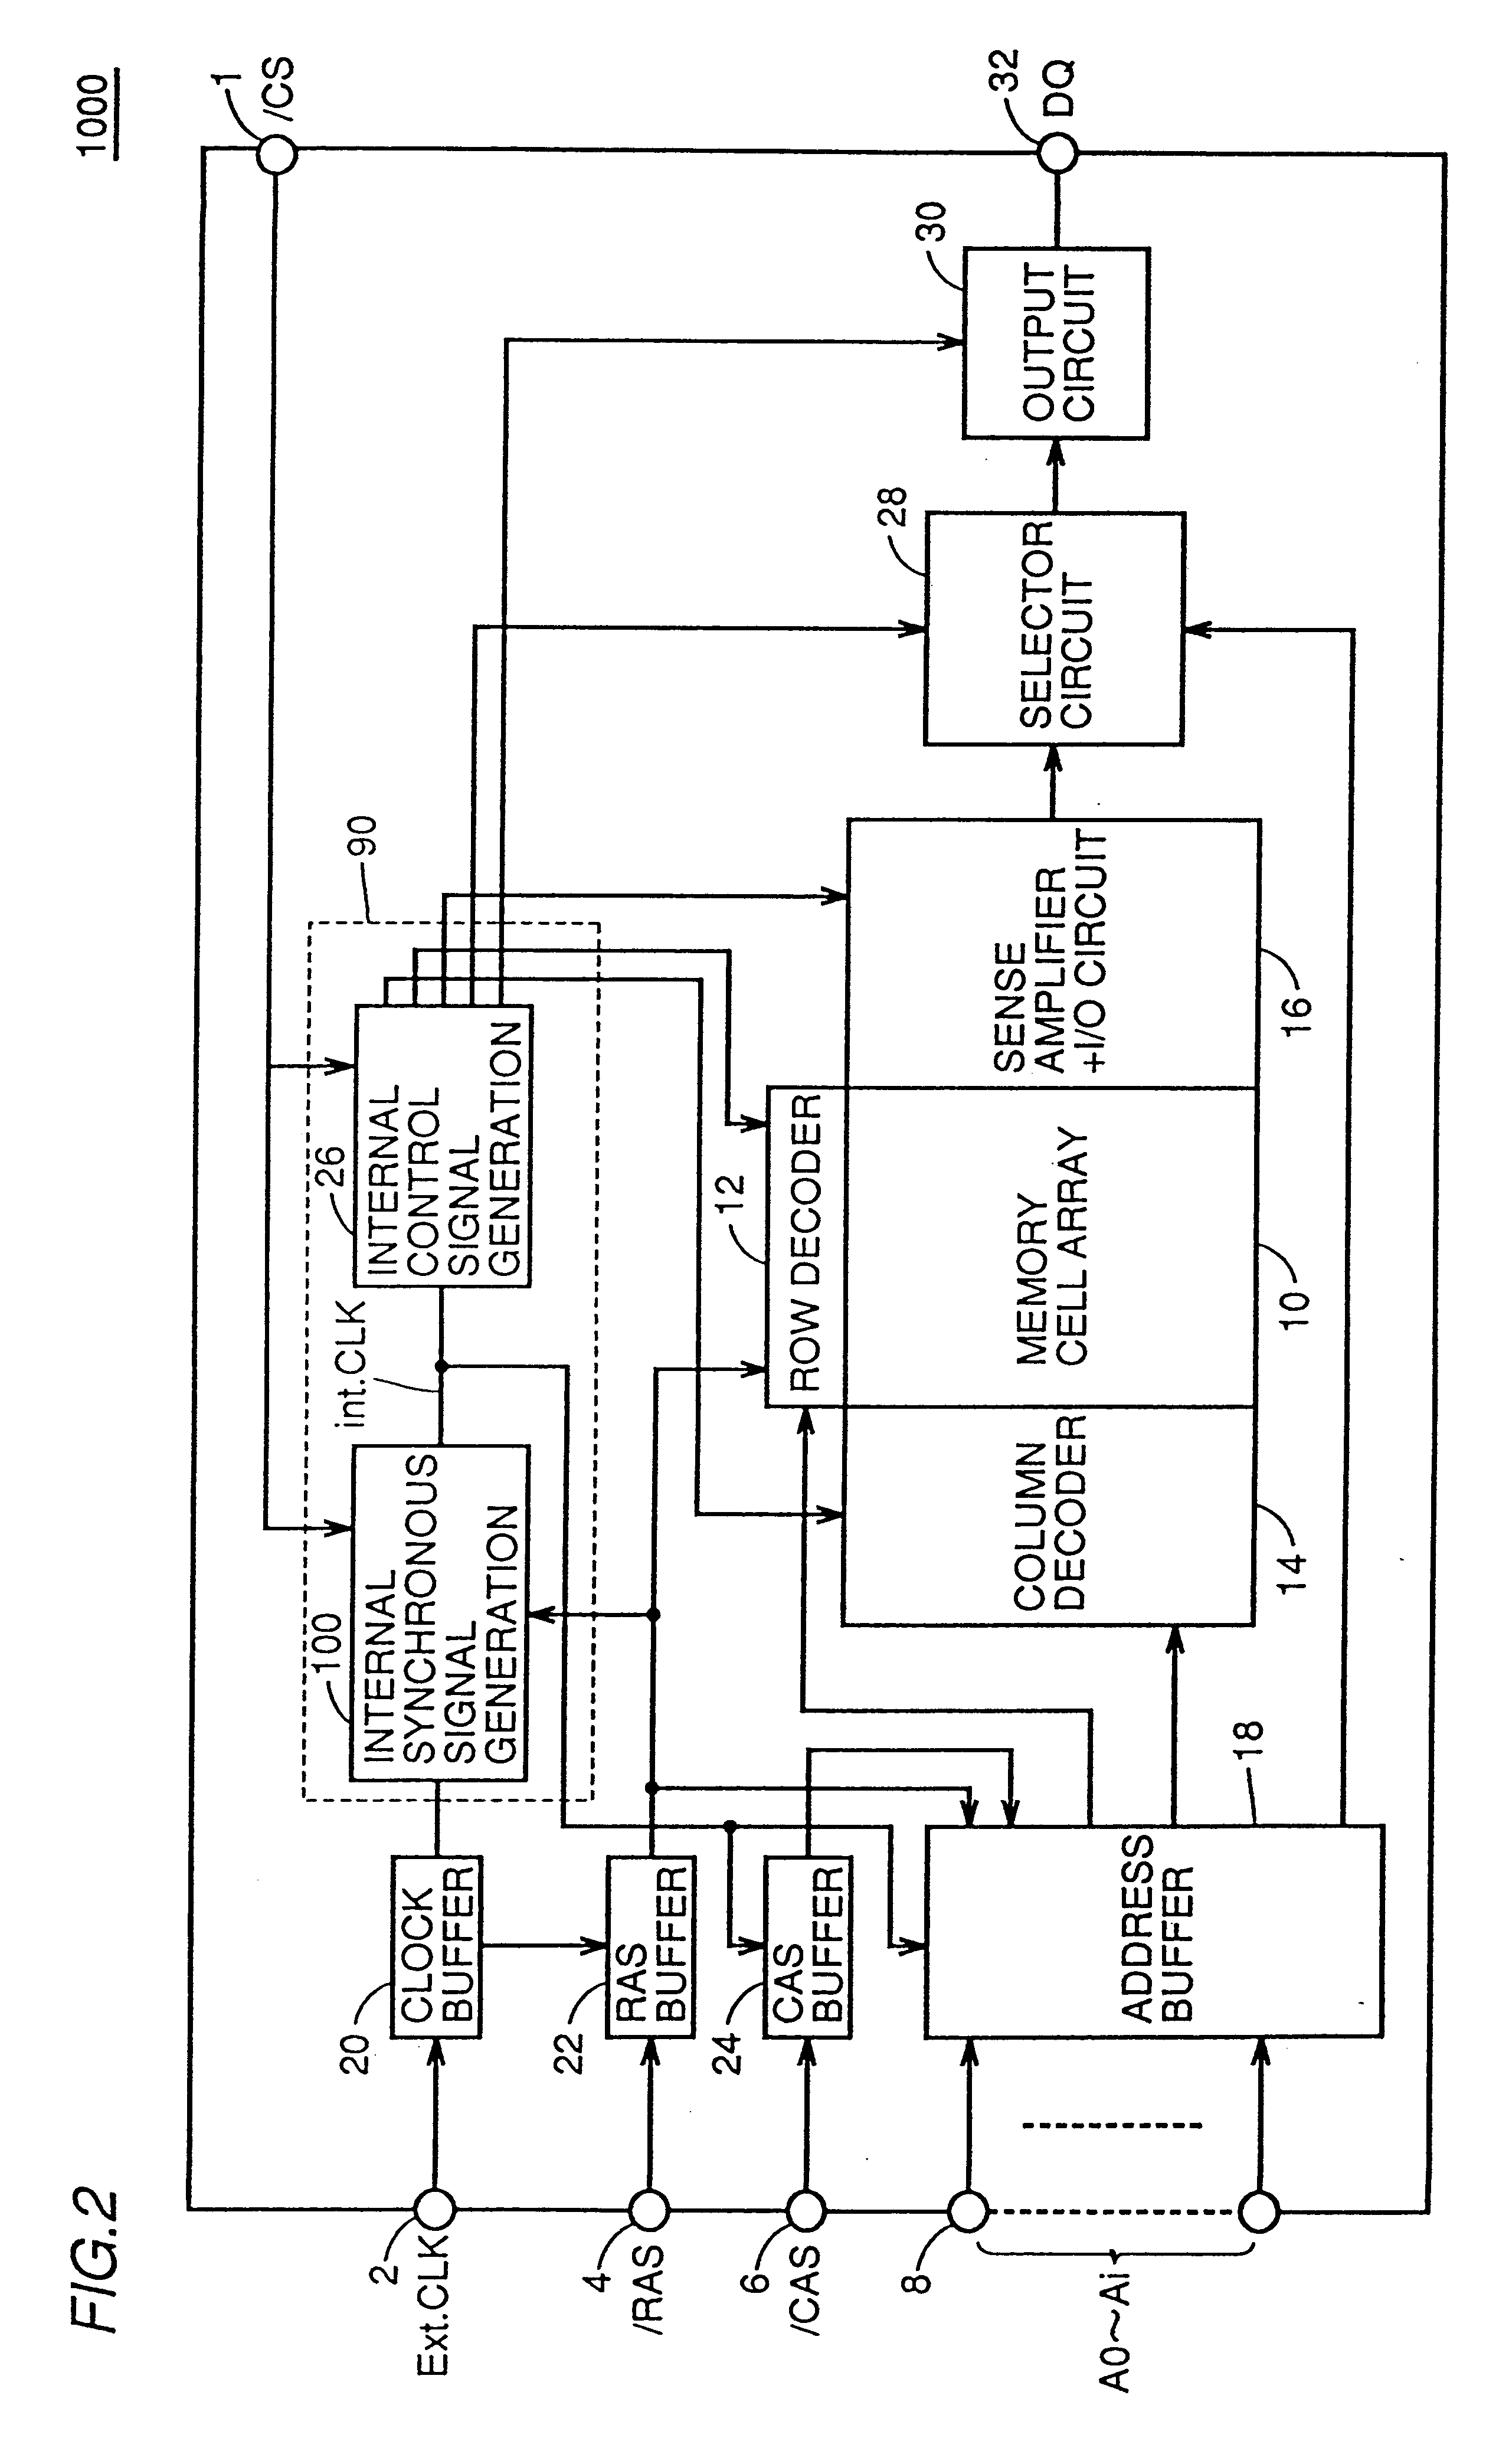 Semiconductor memory device allowing reduction in power consumption during standby